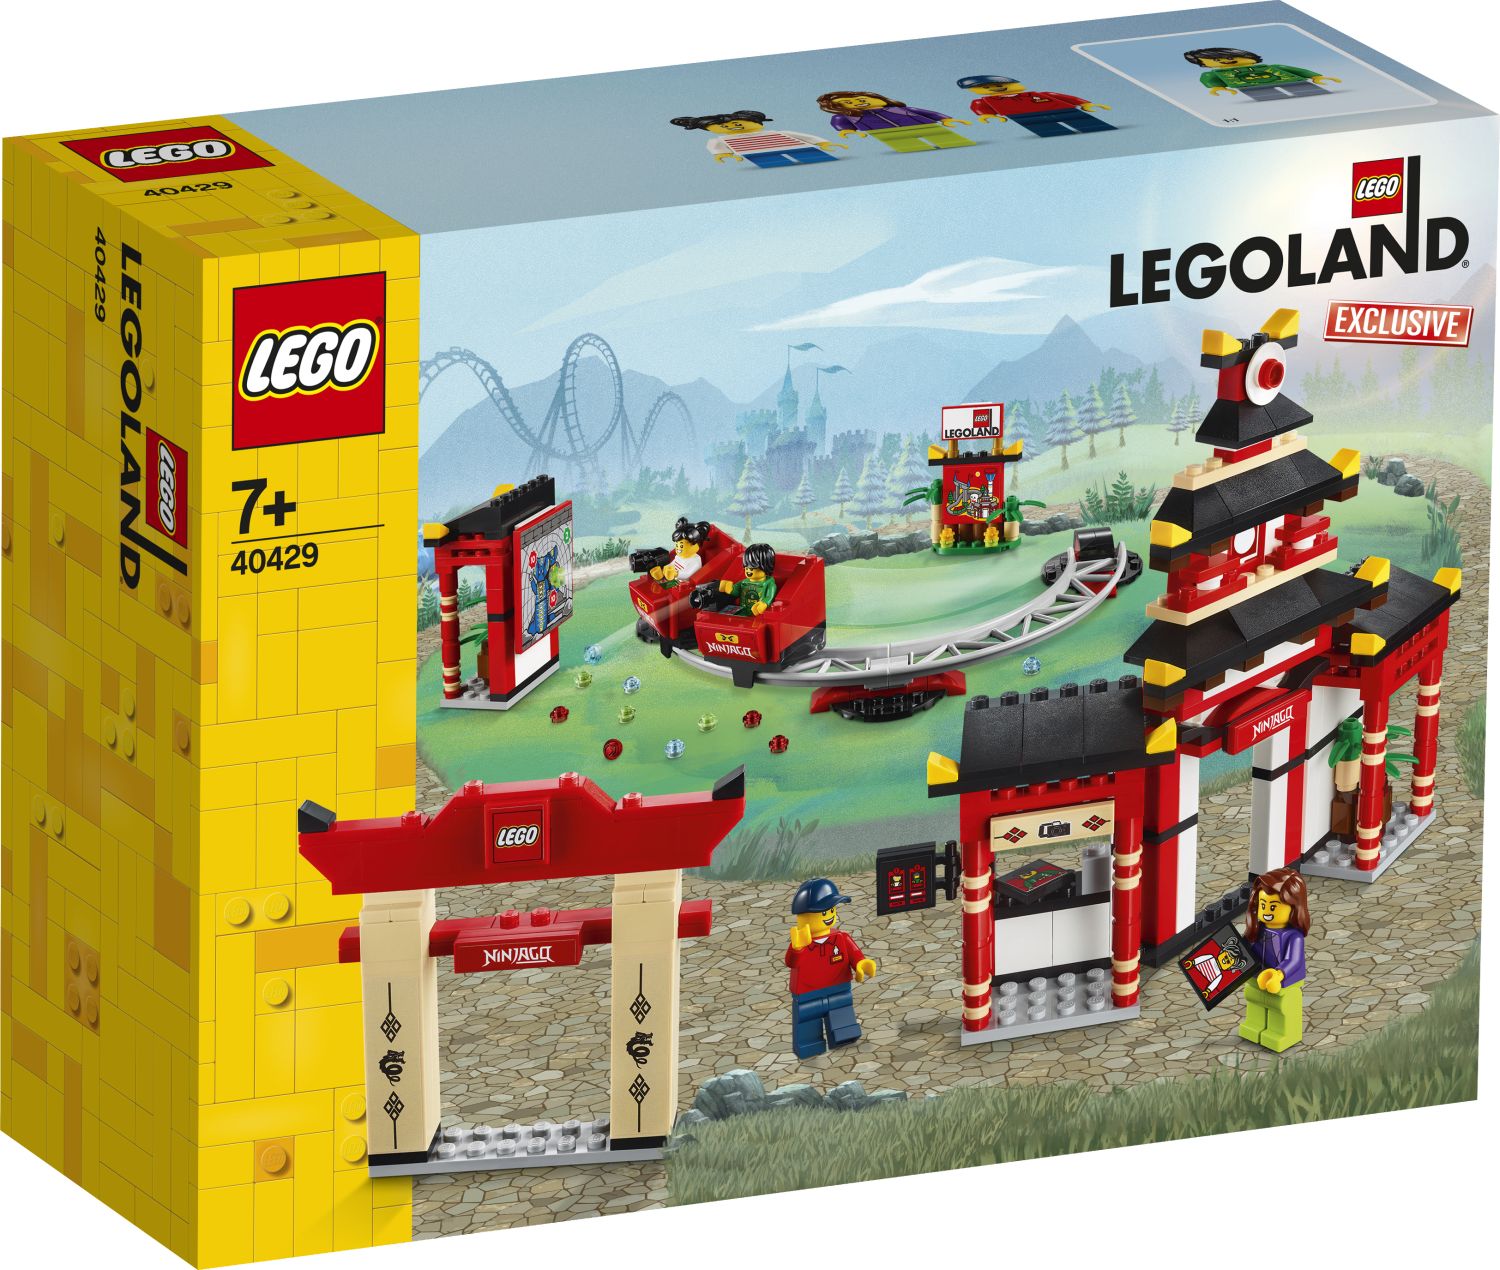 LEGOLAND Exclusive Ninjago World (40429) Official Images - The